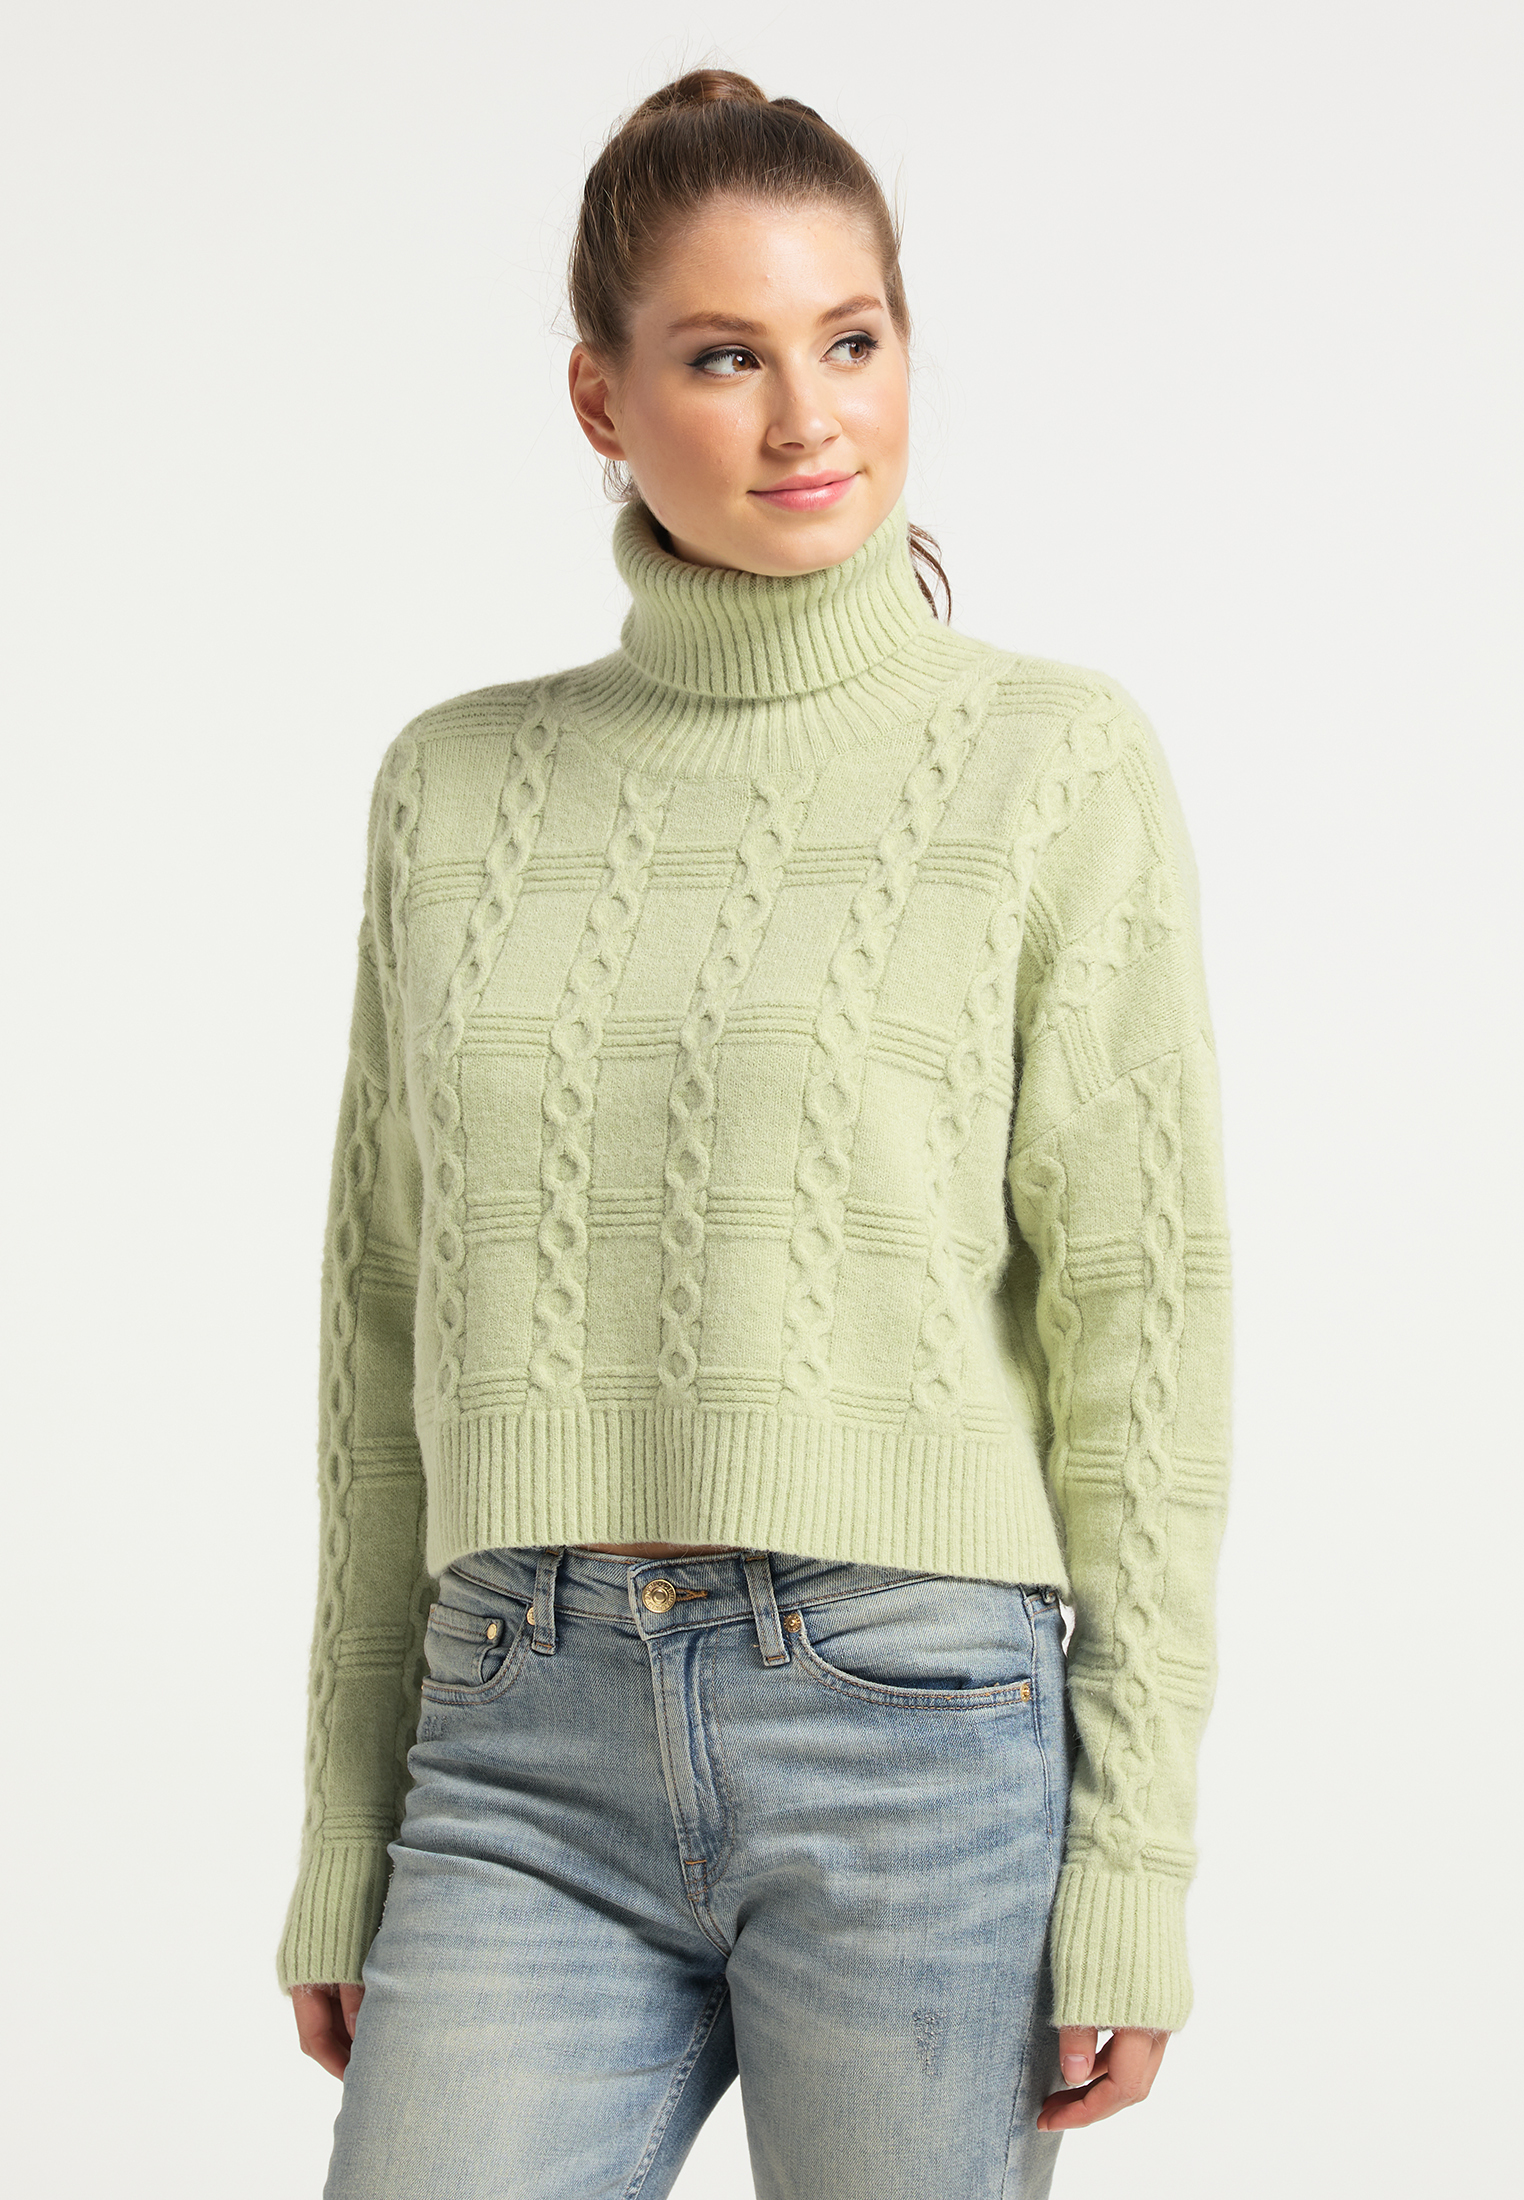 Taglie comode ExY8c myMo NOW Pullover in Canna 